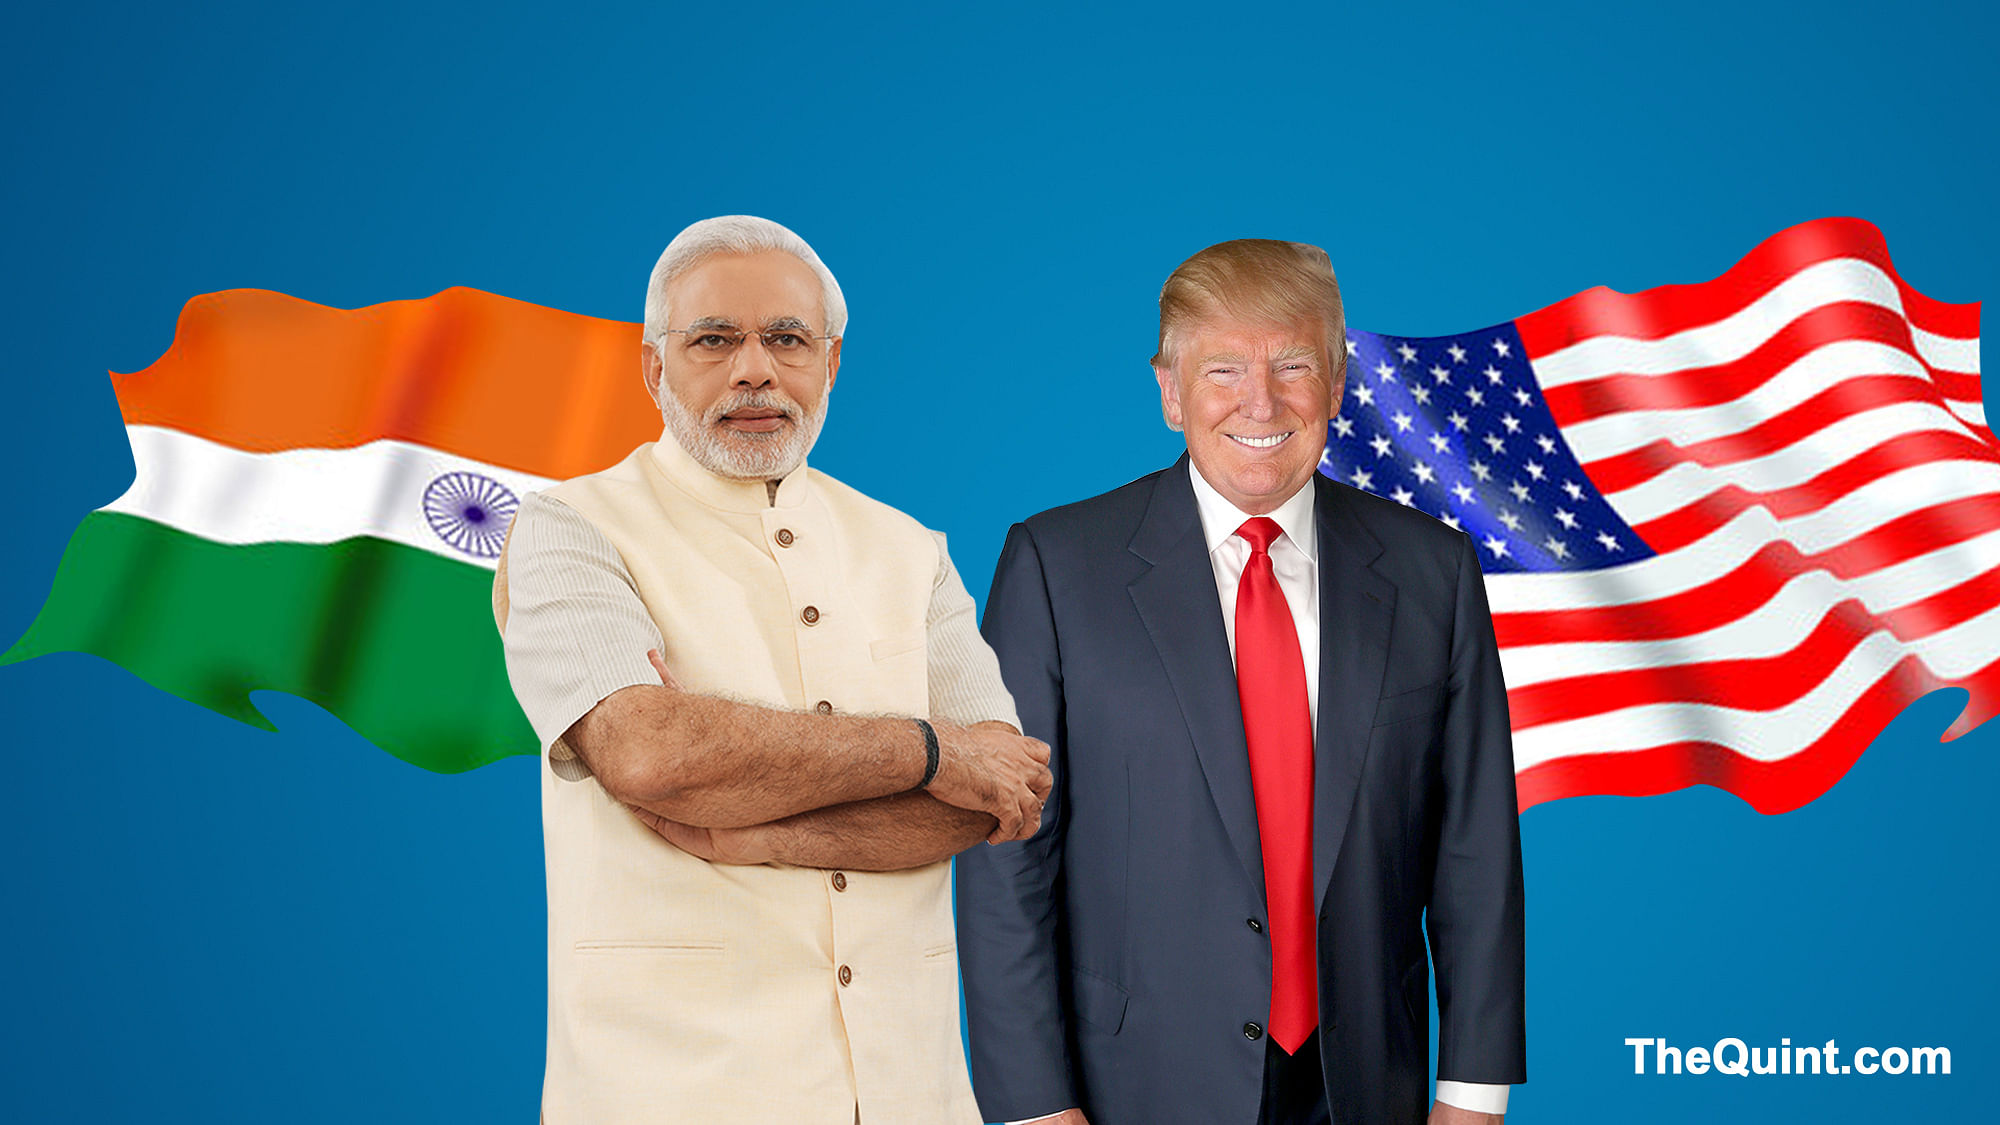 Despite riding high on discontent of people, Trump and Modi differ vastly in their politics. (Photo: Hardeep Singh/ <b>The Quint</b>)